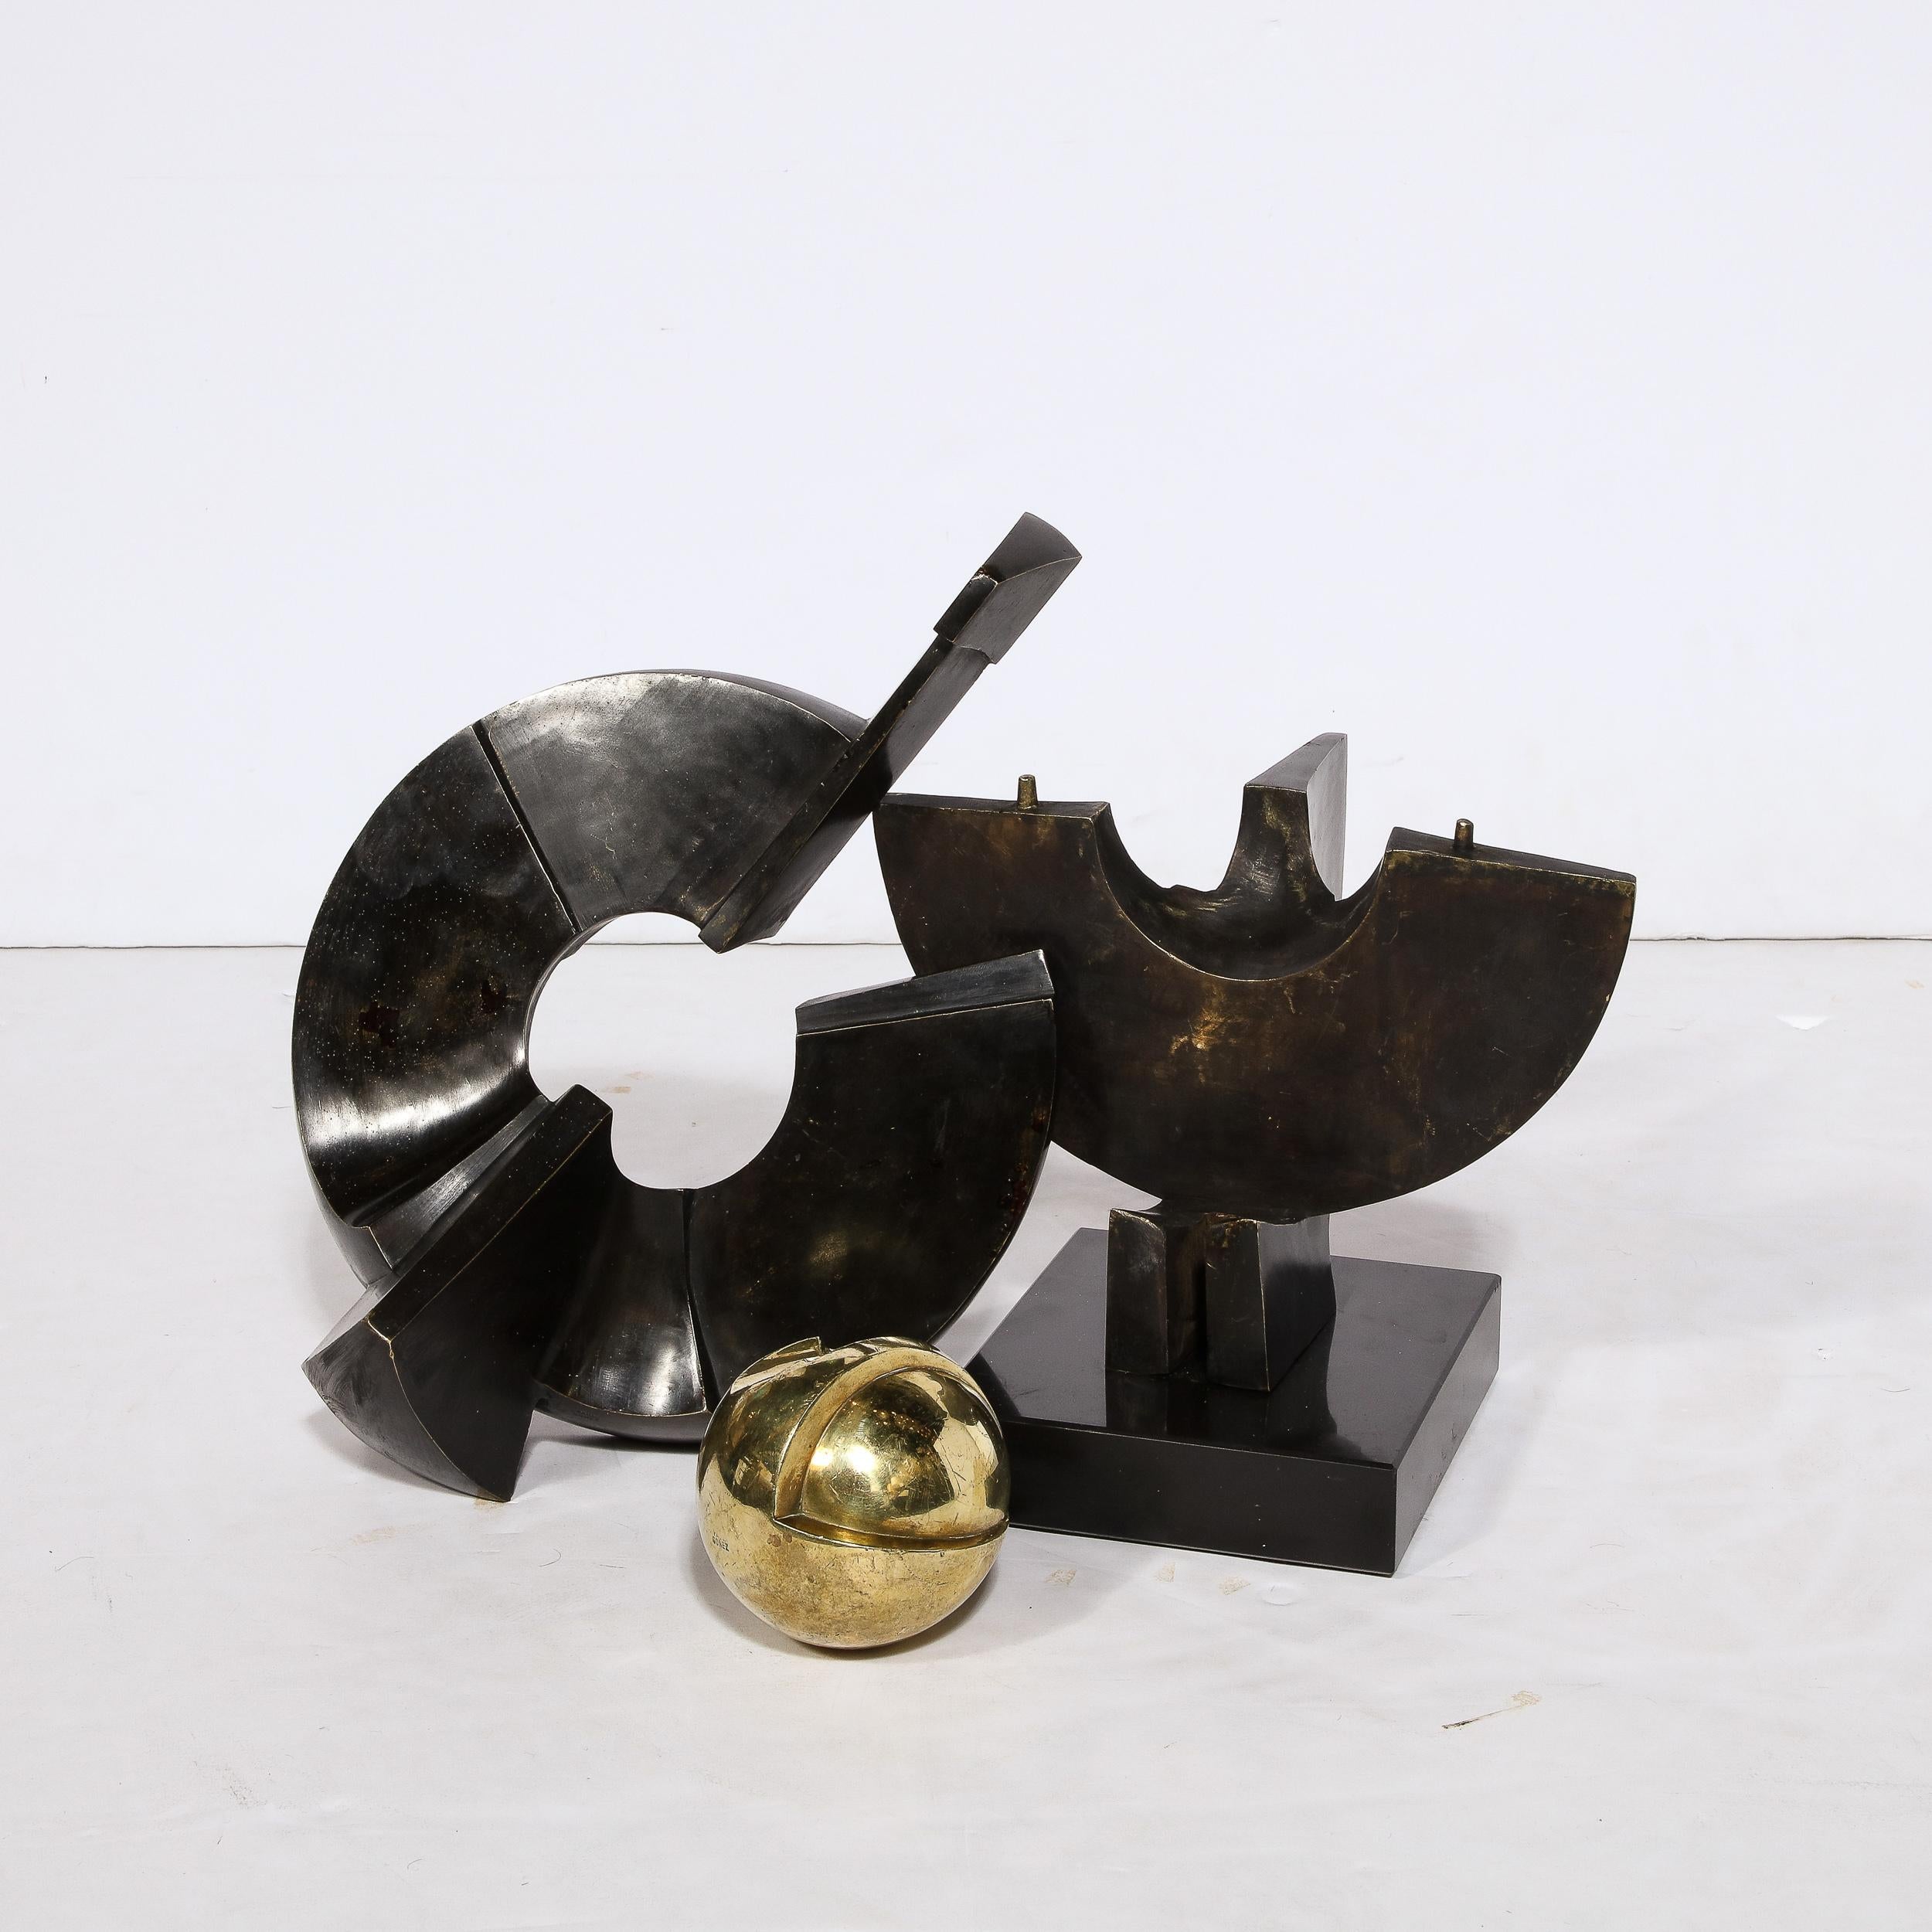 Articulated Abstract Composition in Double Patina Bronze by Paul Gonez 1 of 8 6